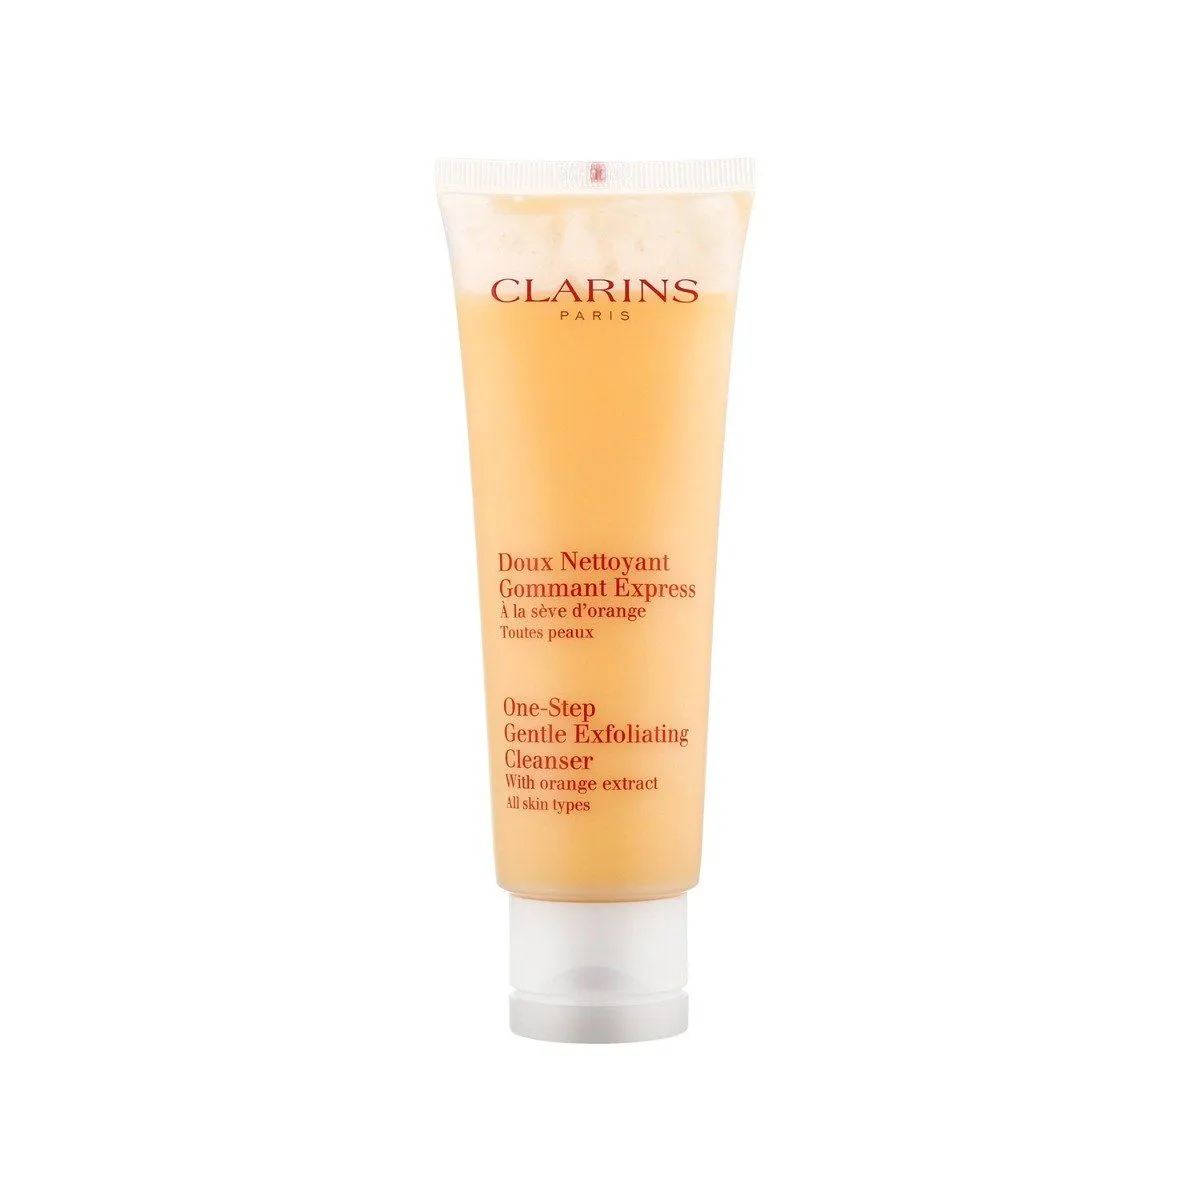 One-Step Gentle Exfoliating Cleanser by Clarins, one of the best French face washes for exfoliating all skin types.